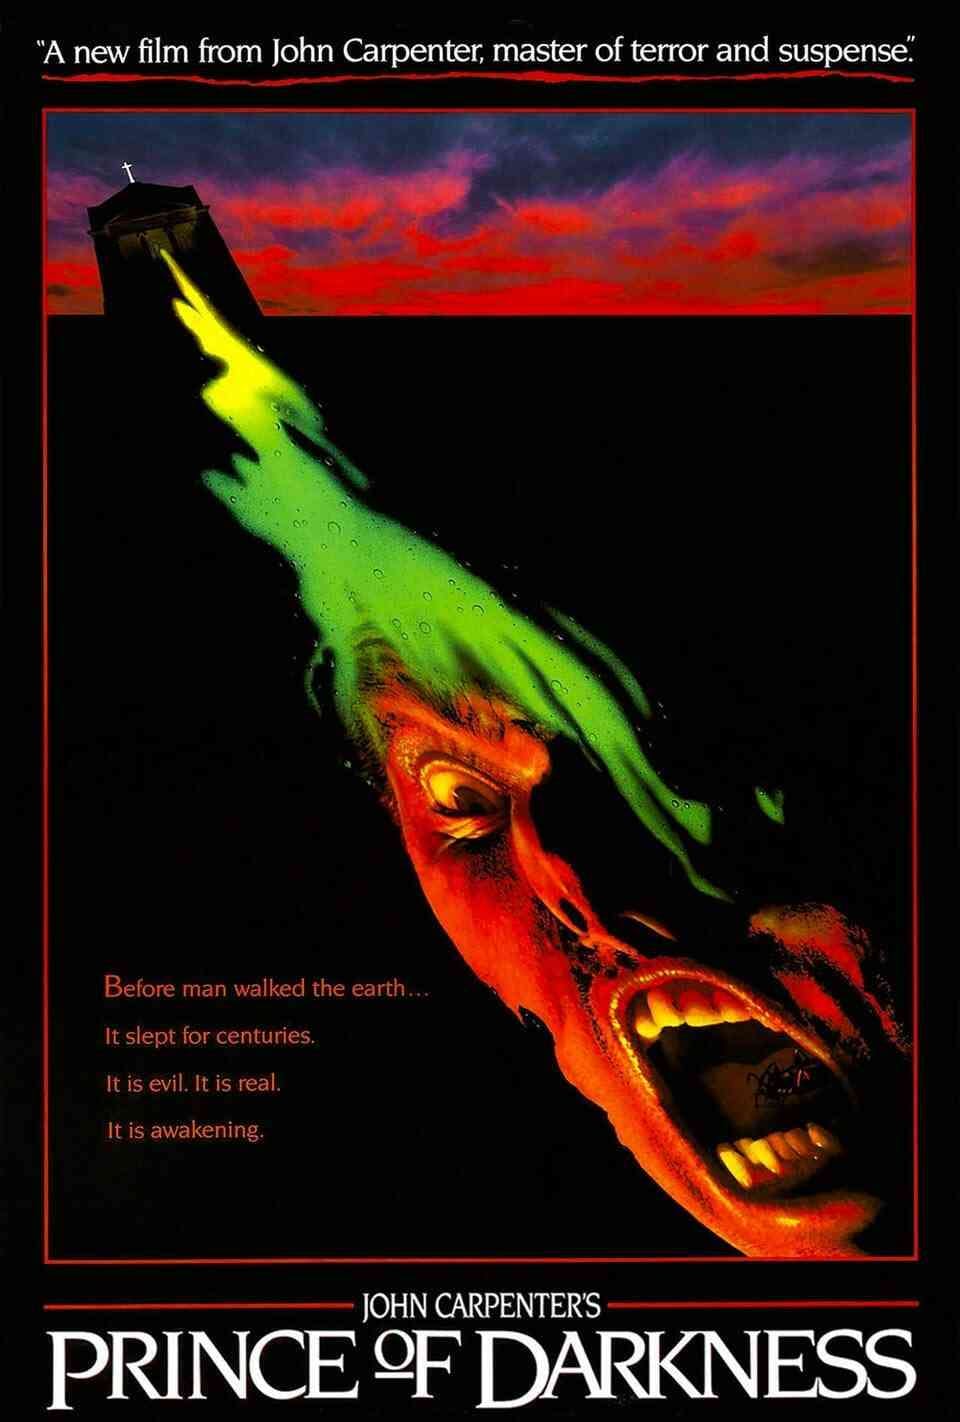 Read Prince of Darkness screenplay (poster)